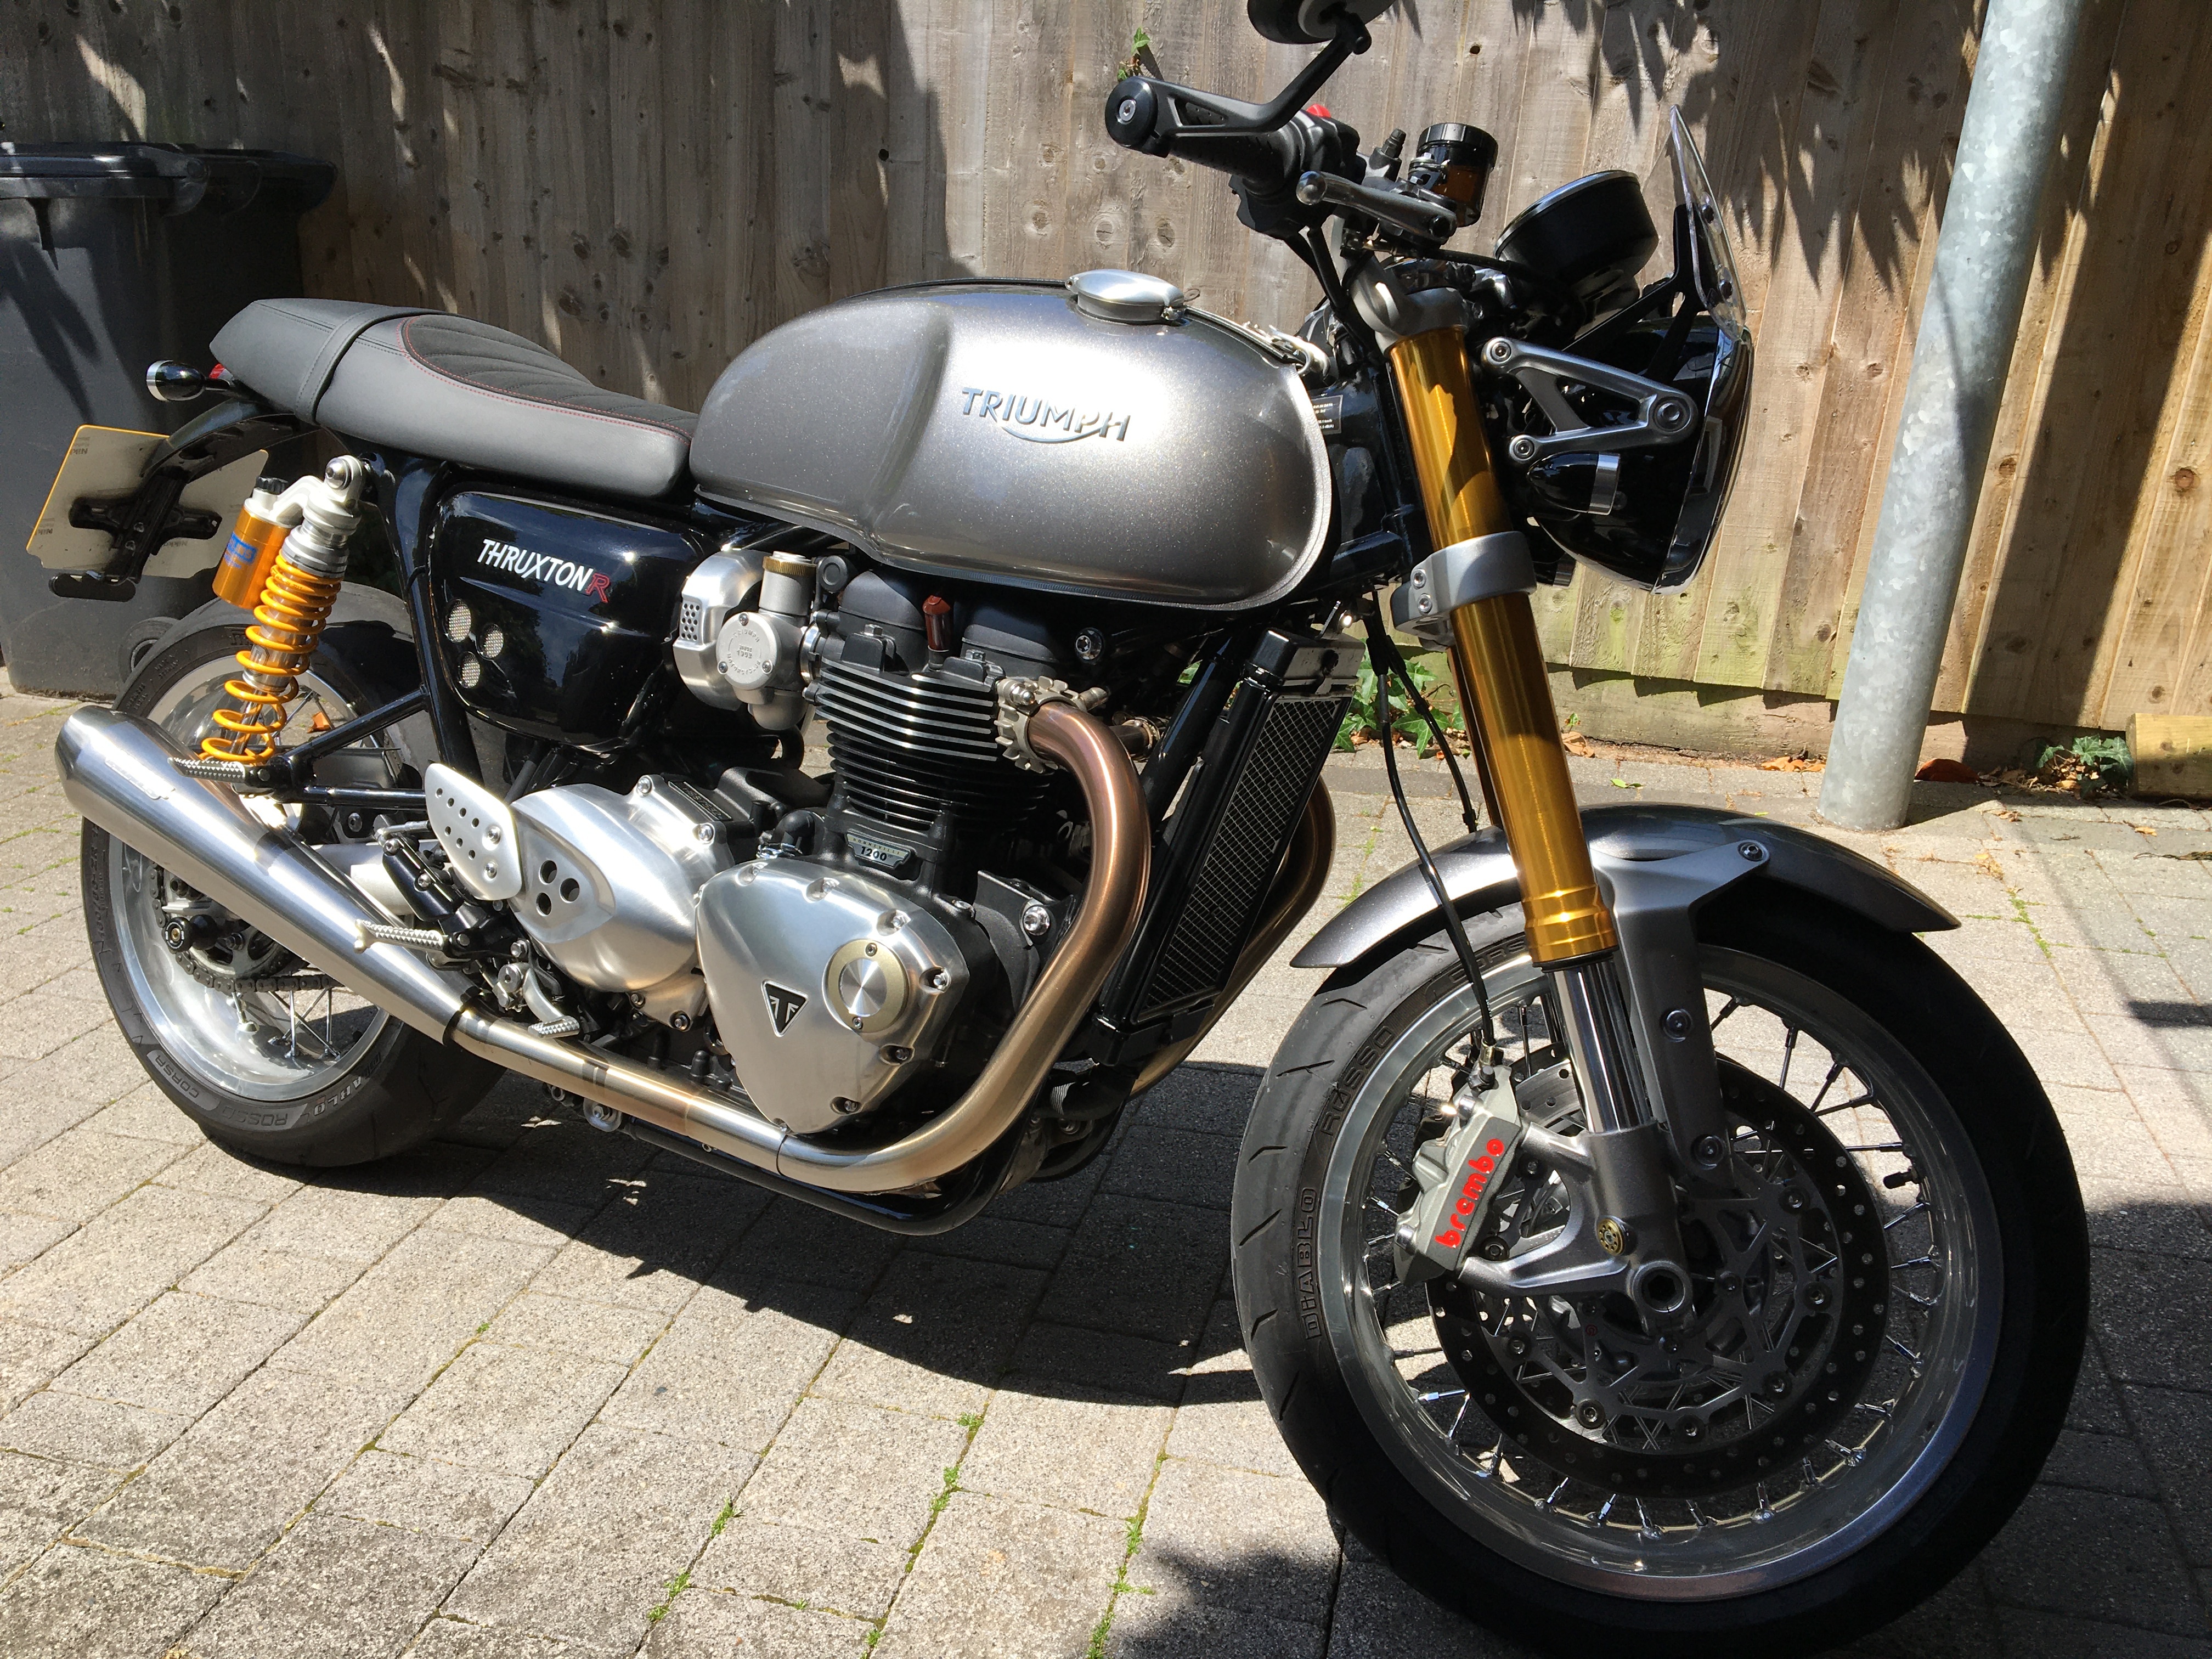 2018 Thruxton R With Extras And Original Parts. *sold* | The Triumph Forum